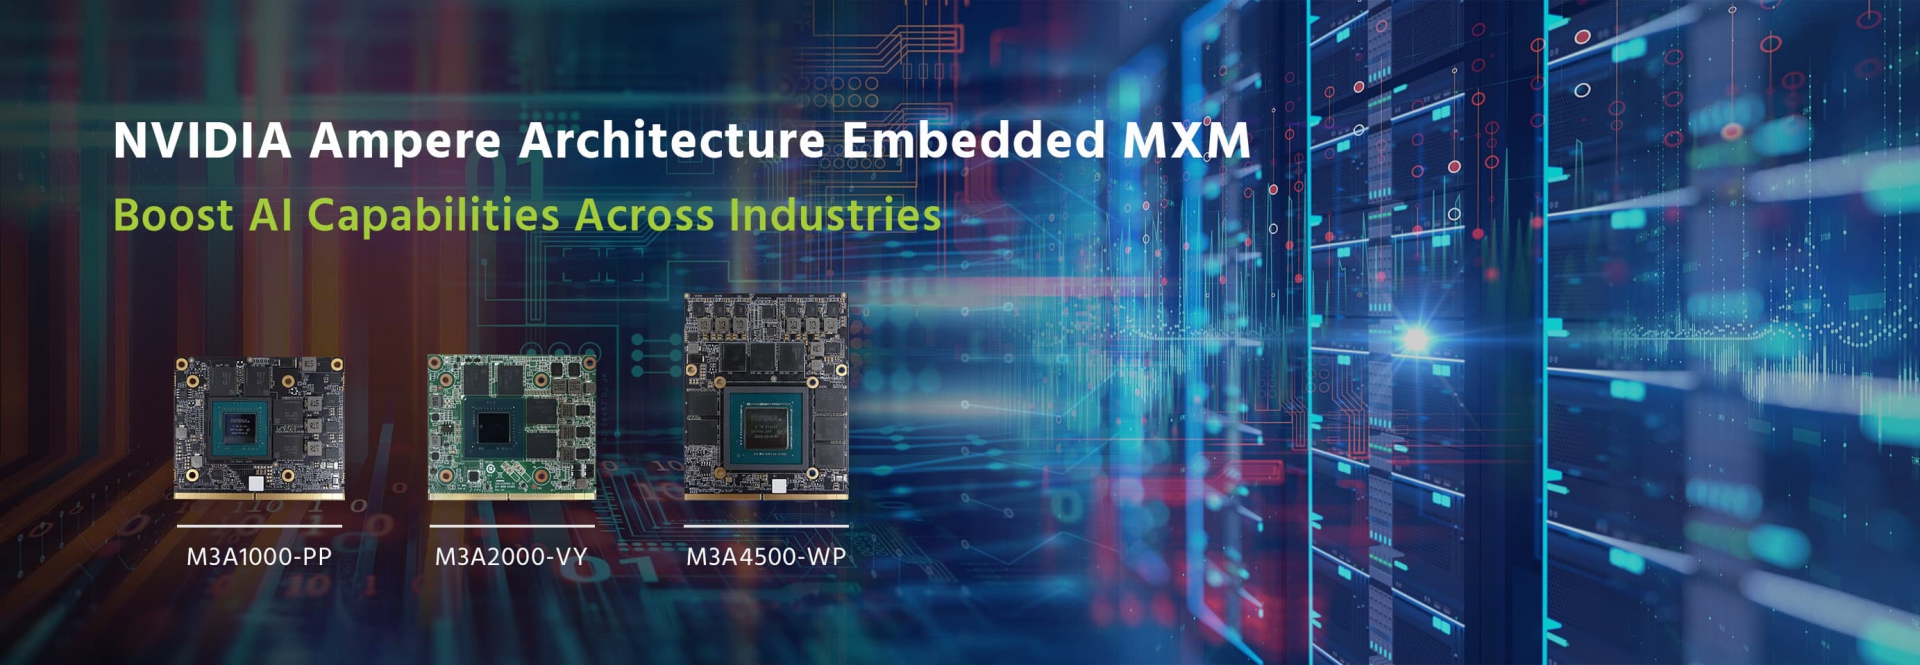 NVIDIA Ampere Architecture Embedded MXM